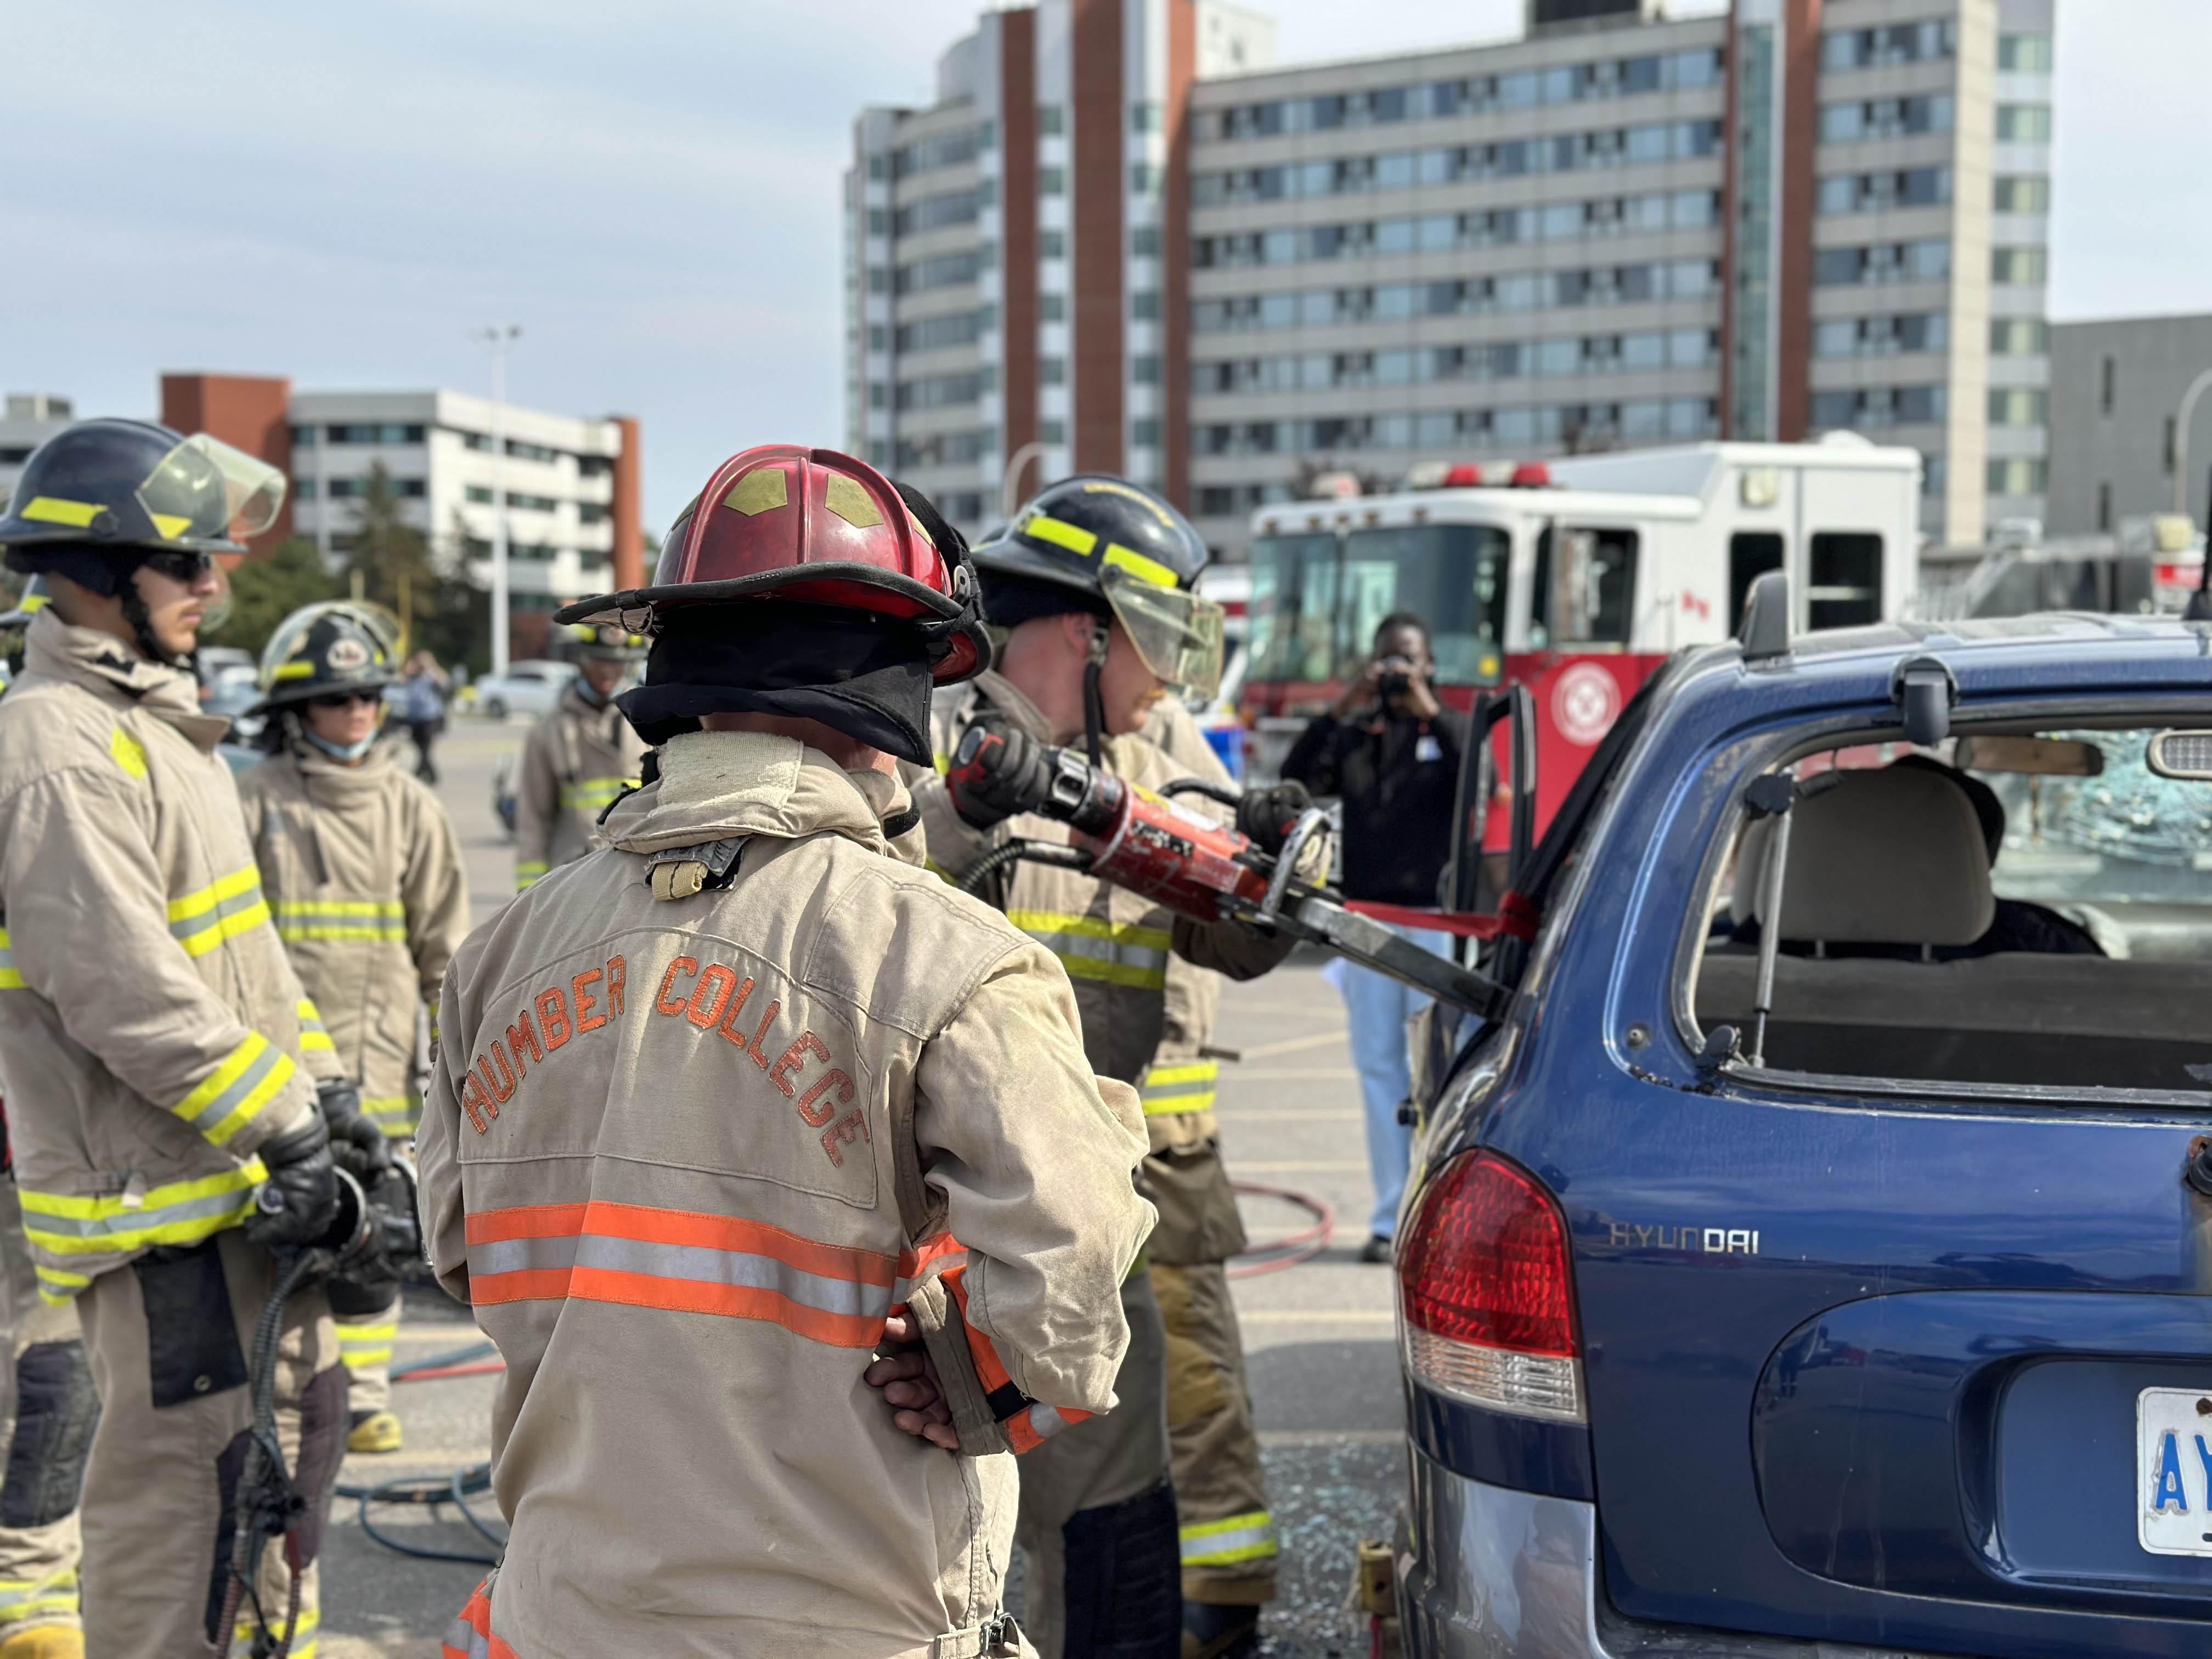 Students wearing firefighter equipment watch as anther person use the 'Jaws of Life' to open the door of a vehicle.